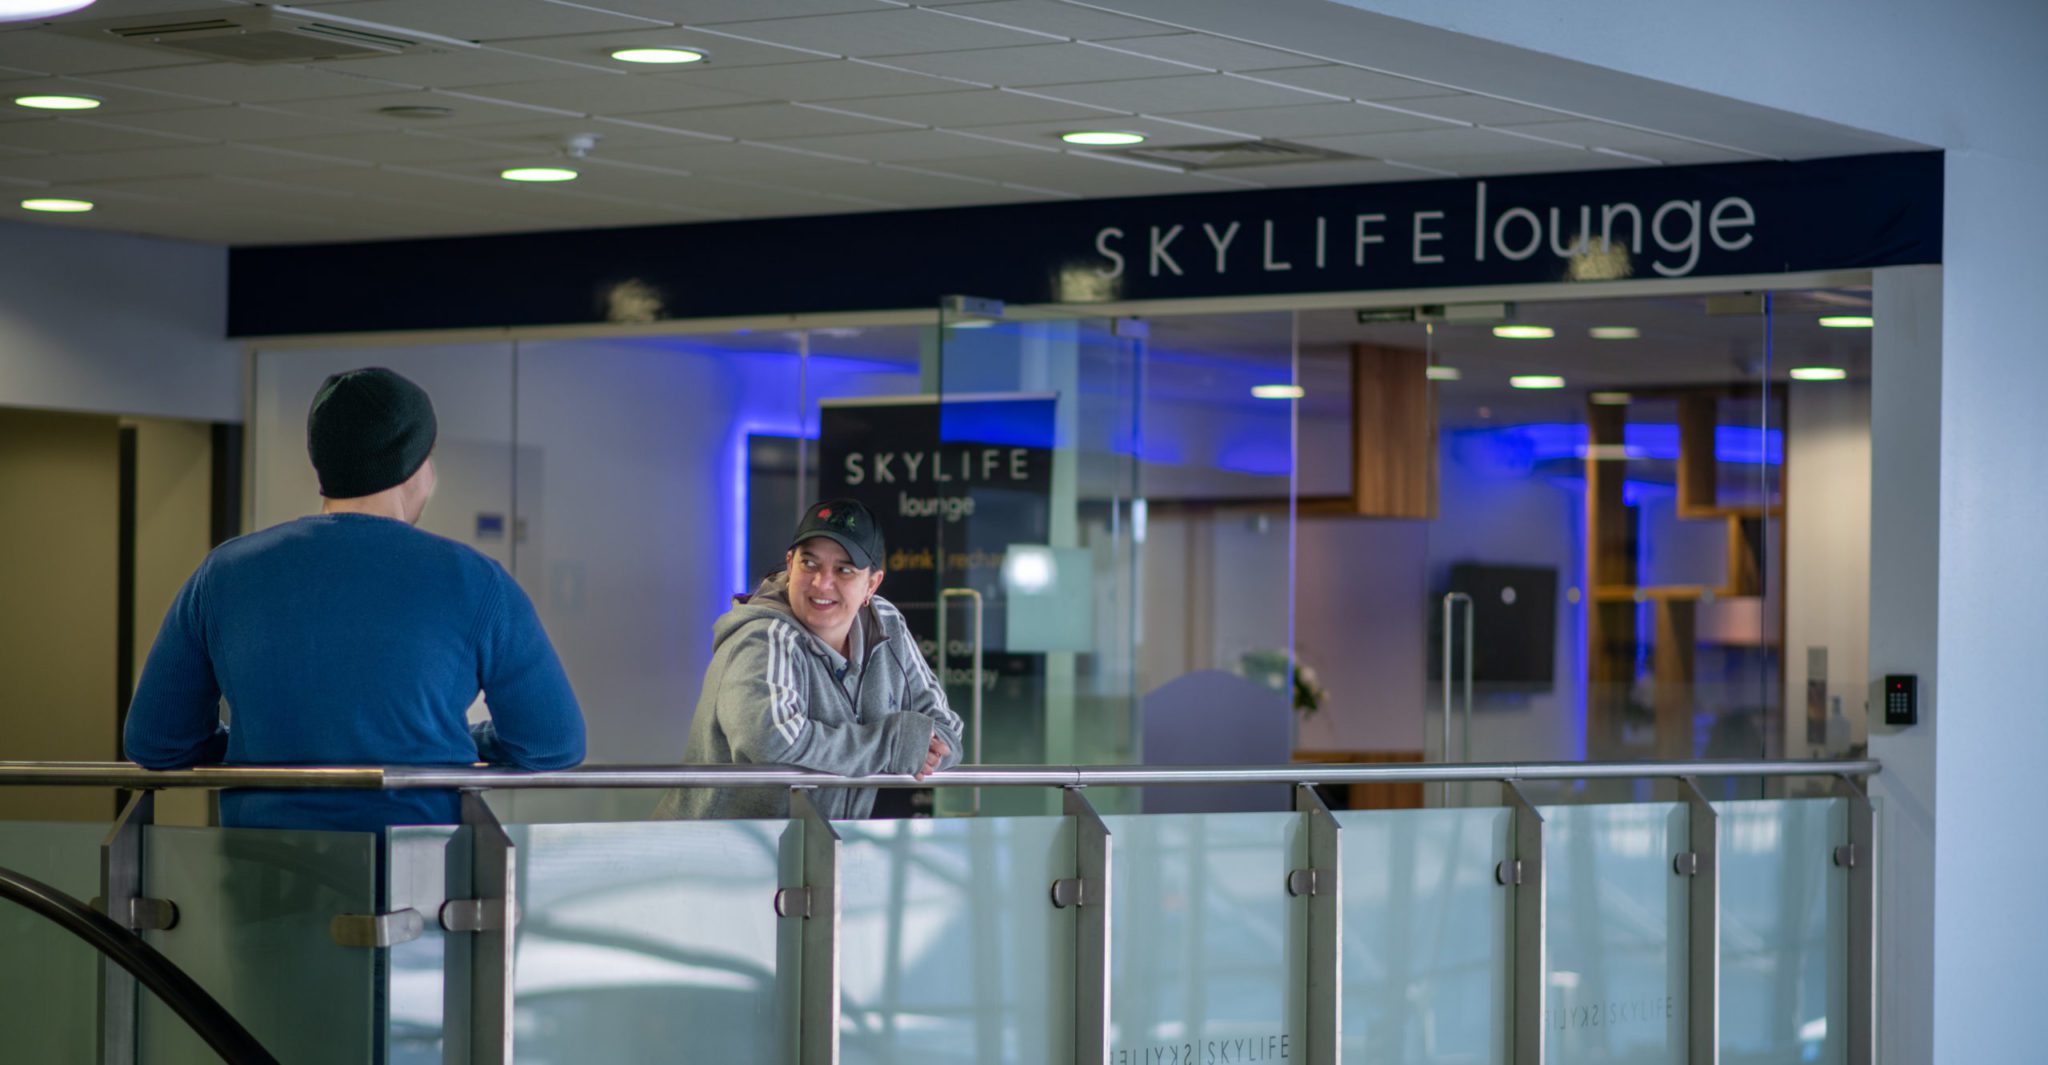 Access to the SKYLIFE Lounge